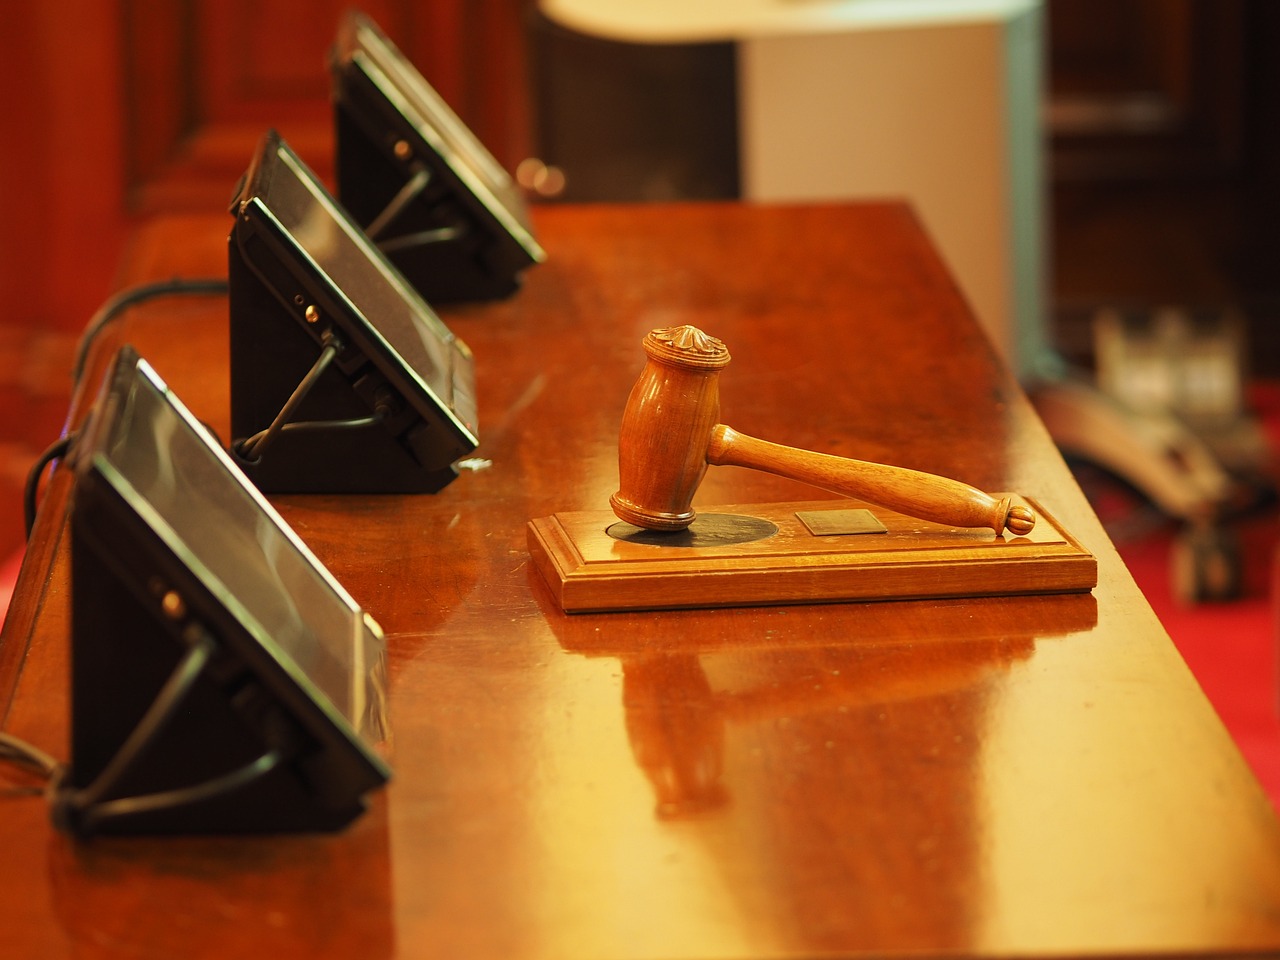 A gavel on top of the table